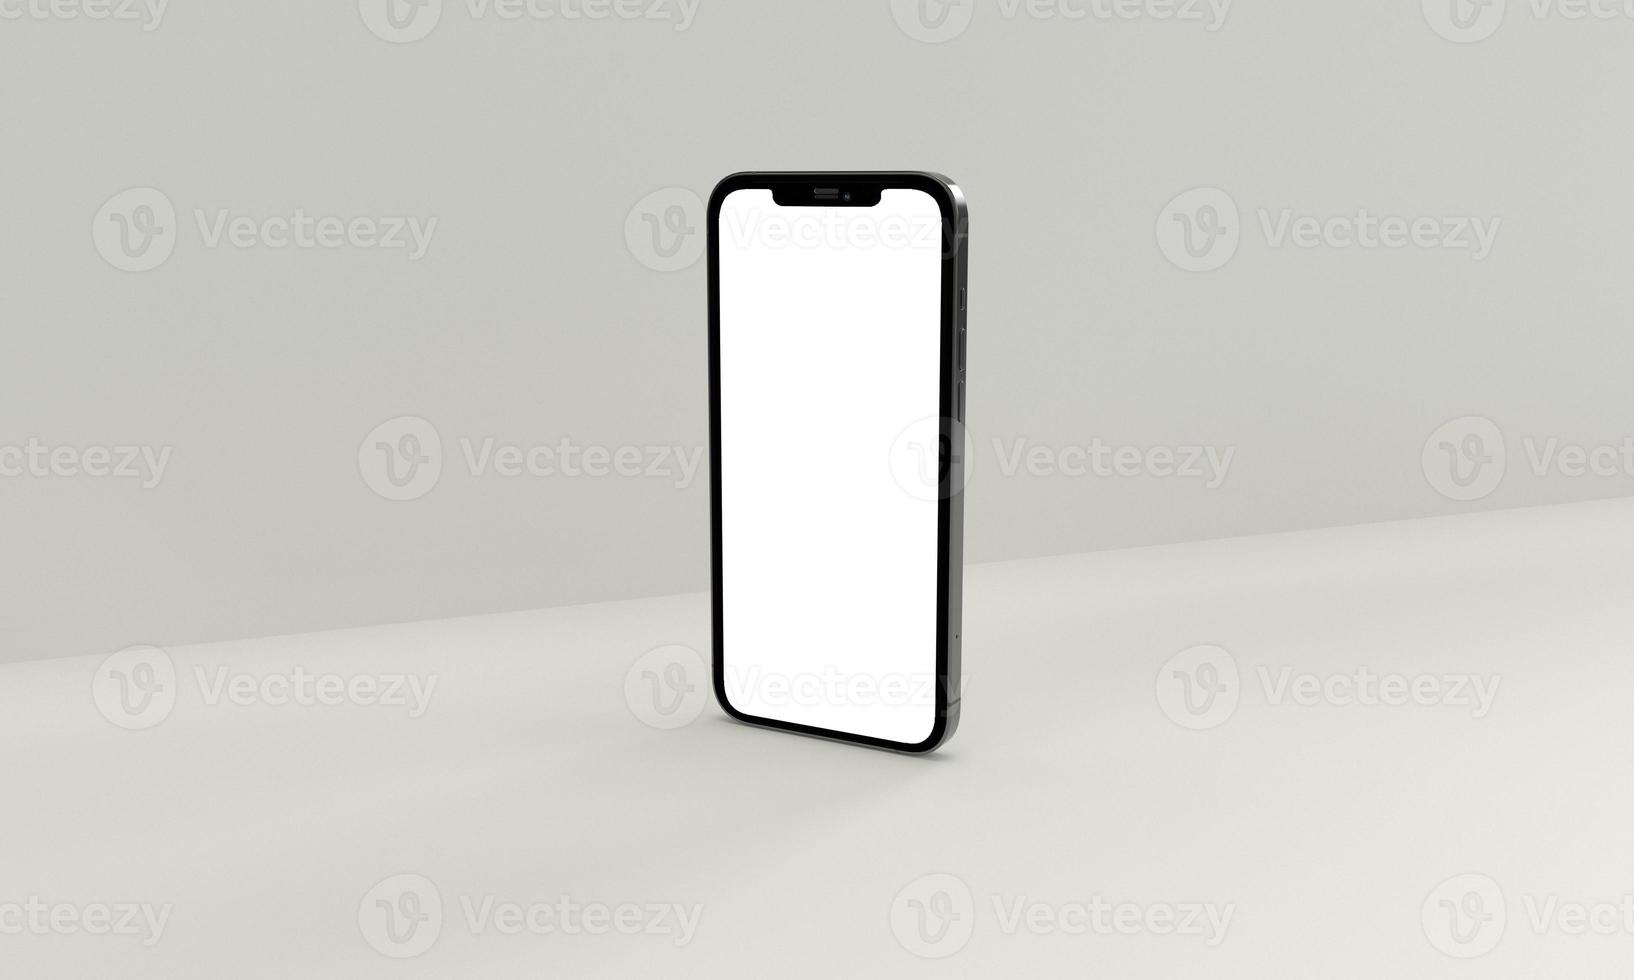 3d render illustration hand holding the white smartphone with full screen and modern frame less design - isolated on white background photo